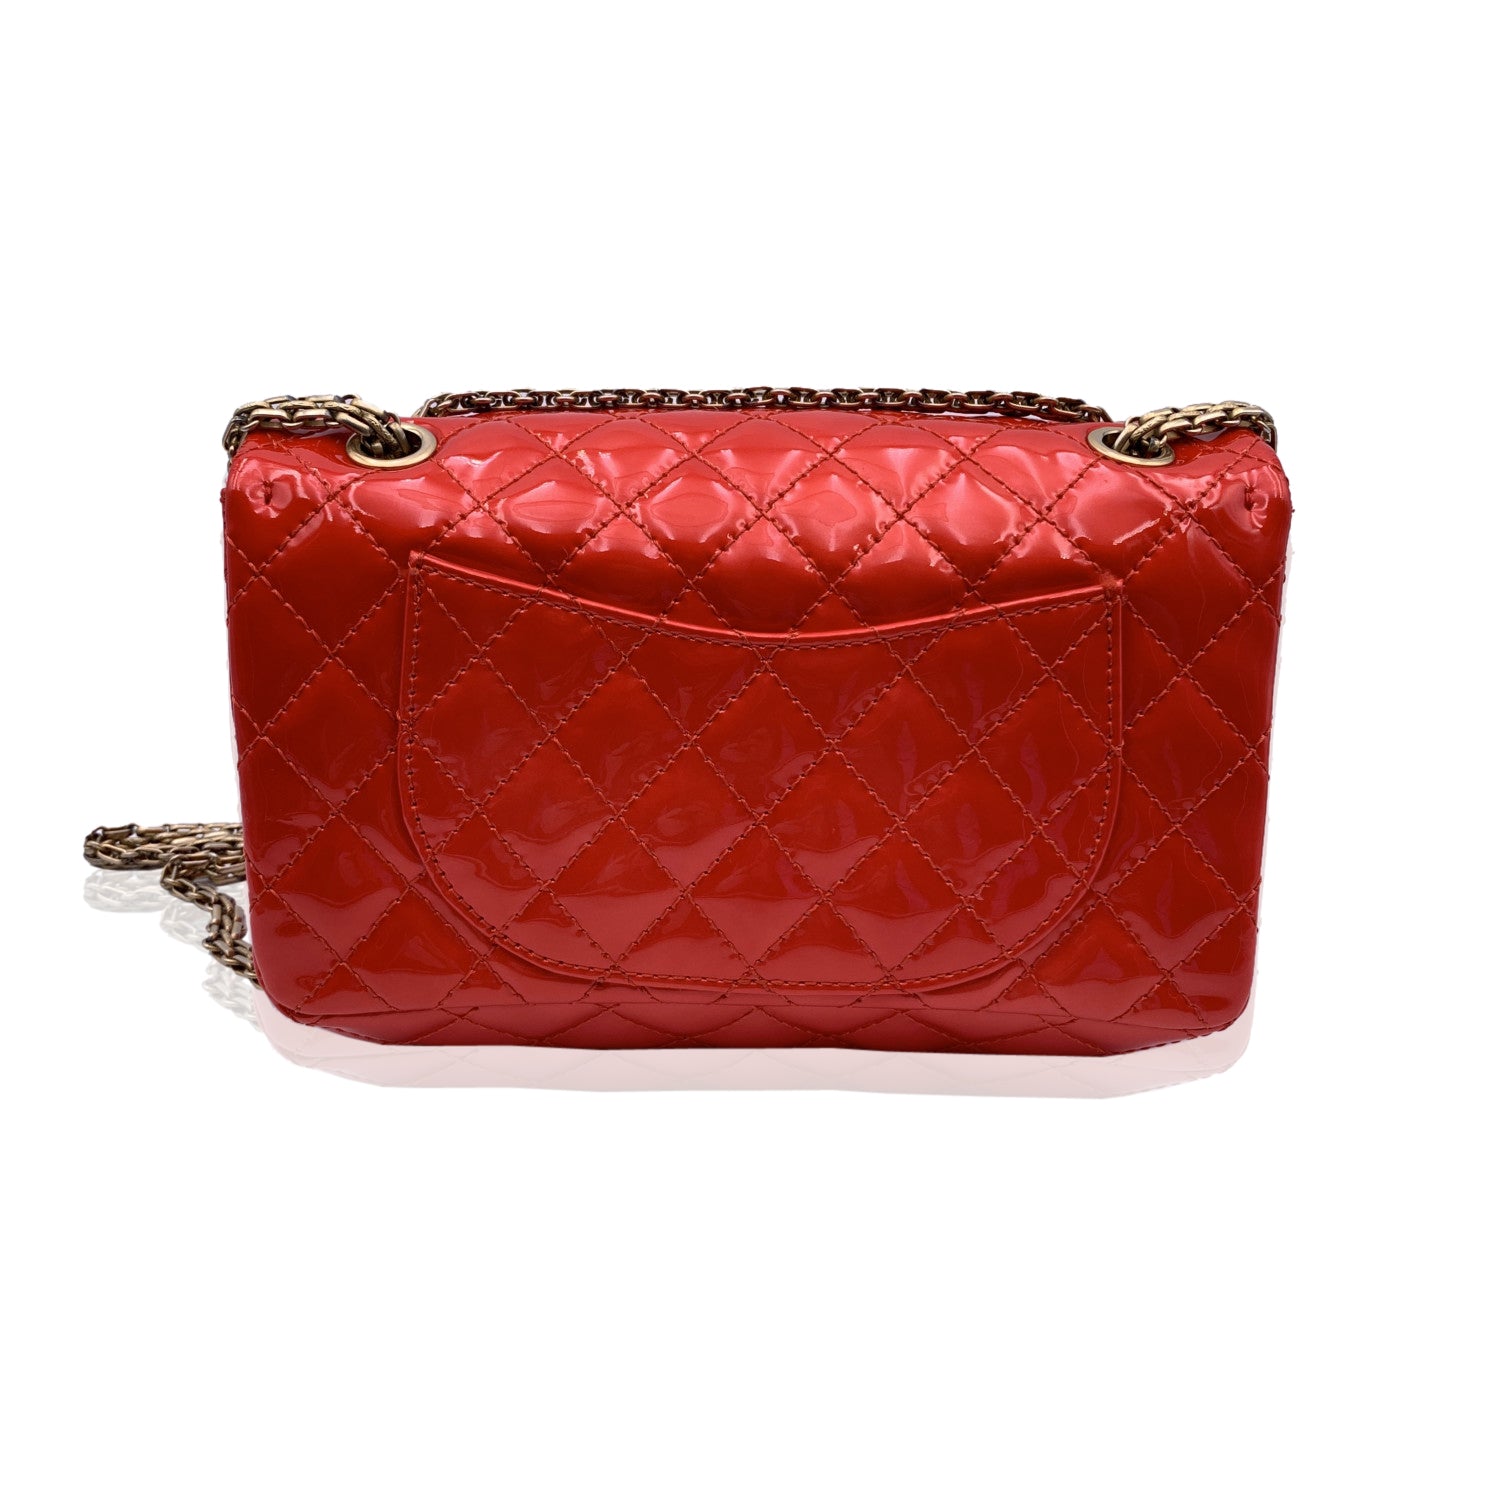 Chanel Red Quilted Patent Leather 2.55 Reissue Flap Accordion Bag